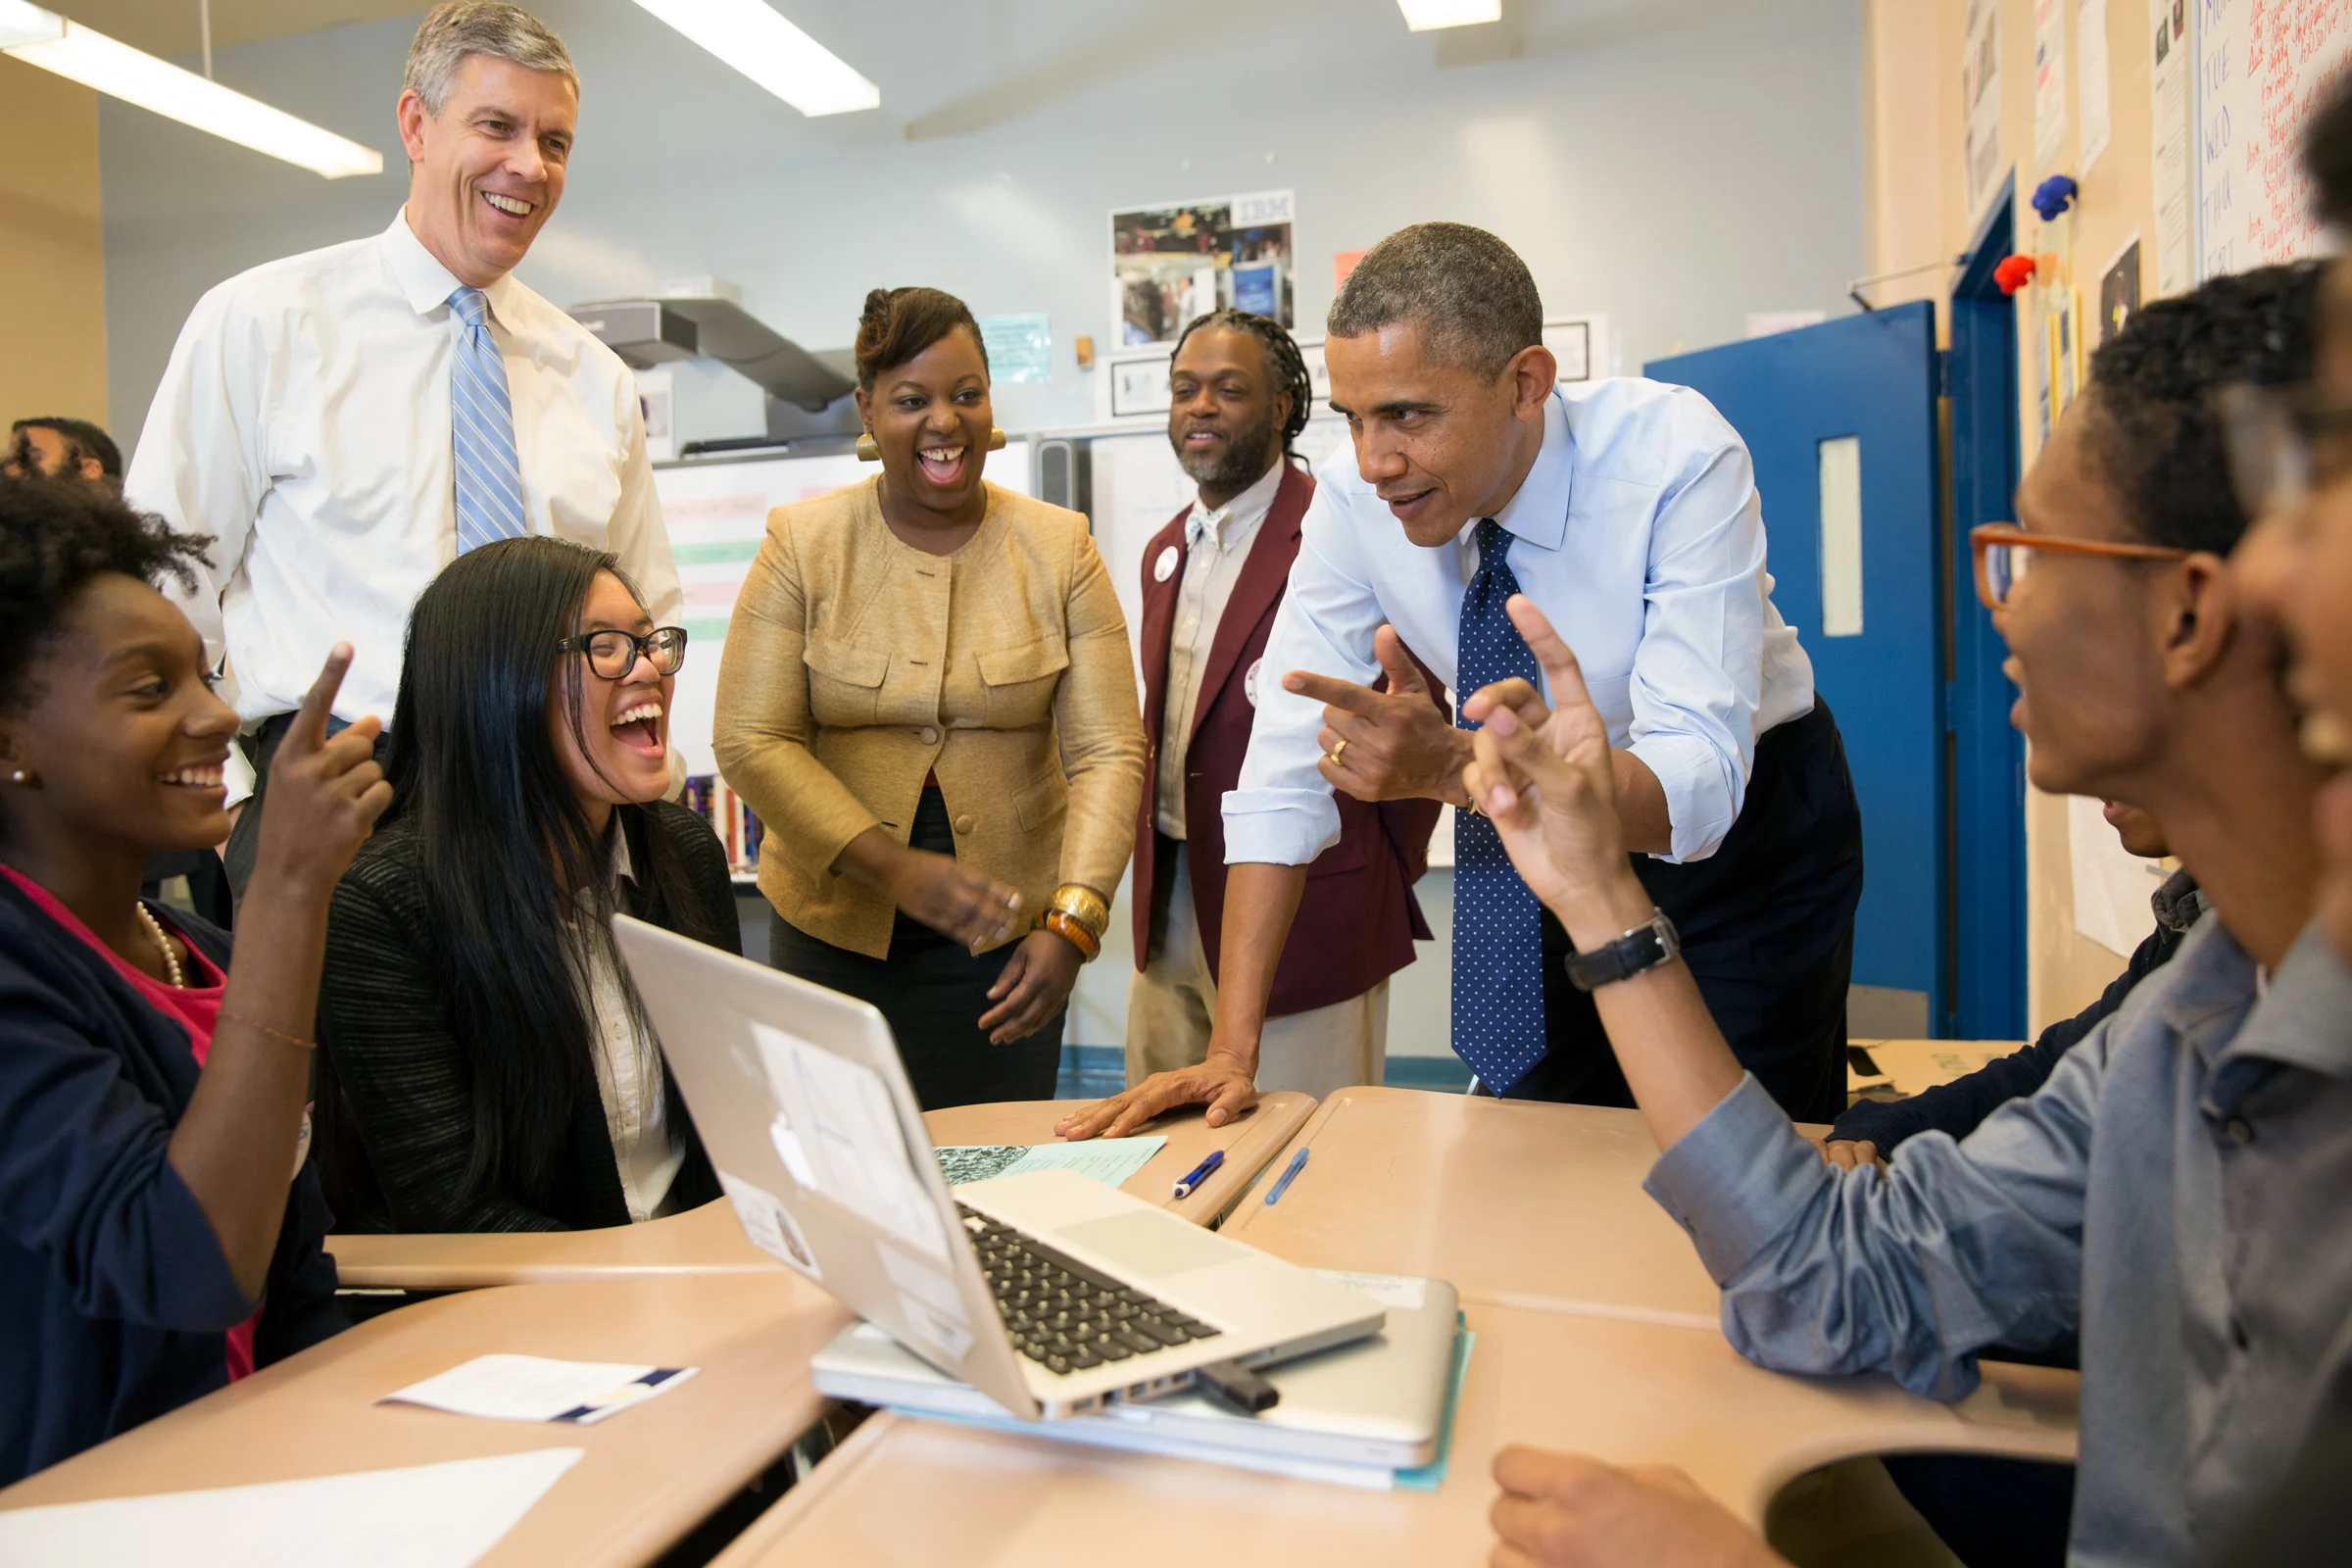 Barack Obama with one hand on a desk and the other pointing forwards looks at a group of people sitting and standing around him smiling and laughing. There is a computer on the desk. 